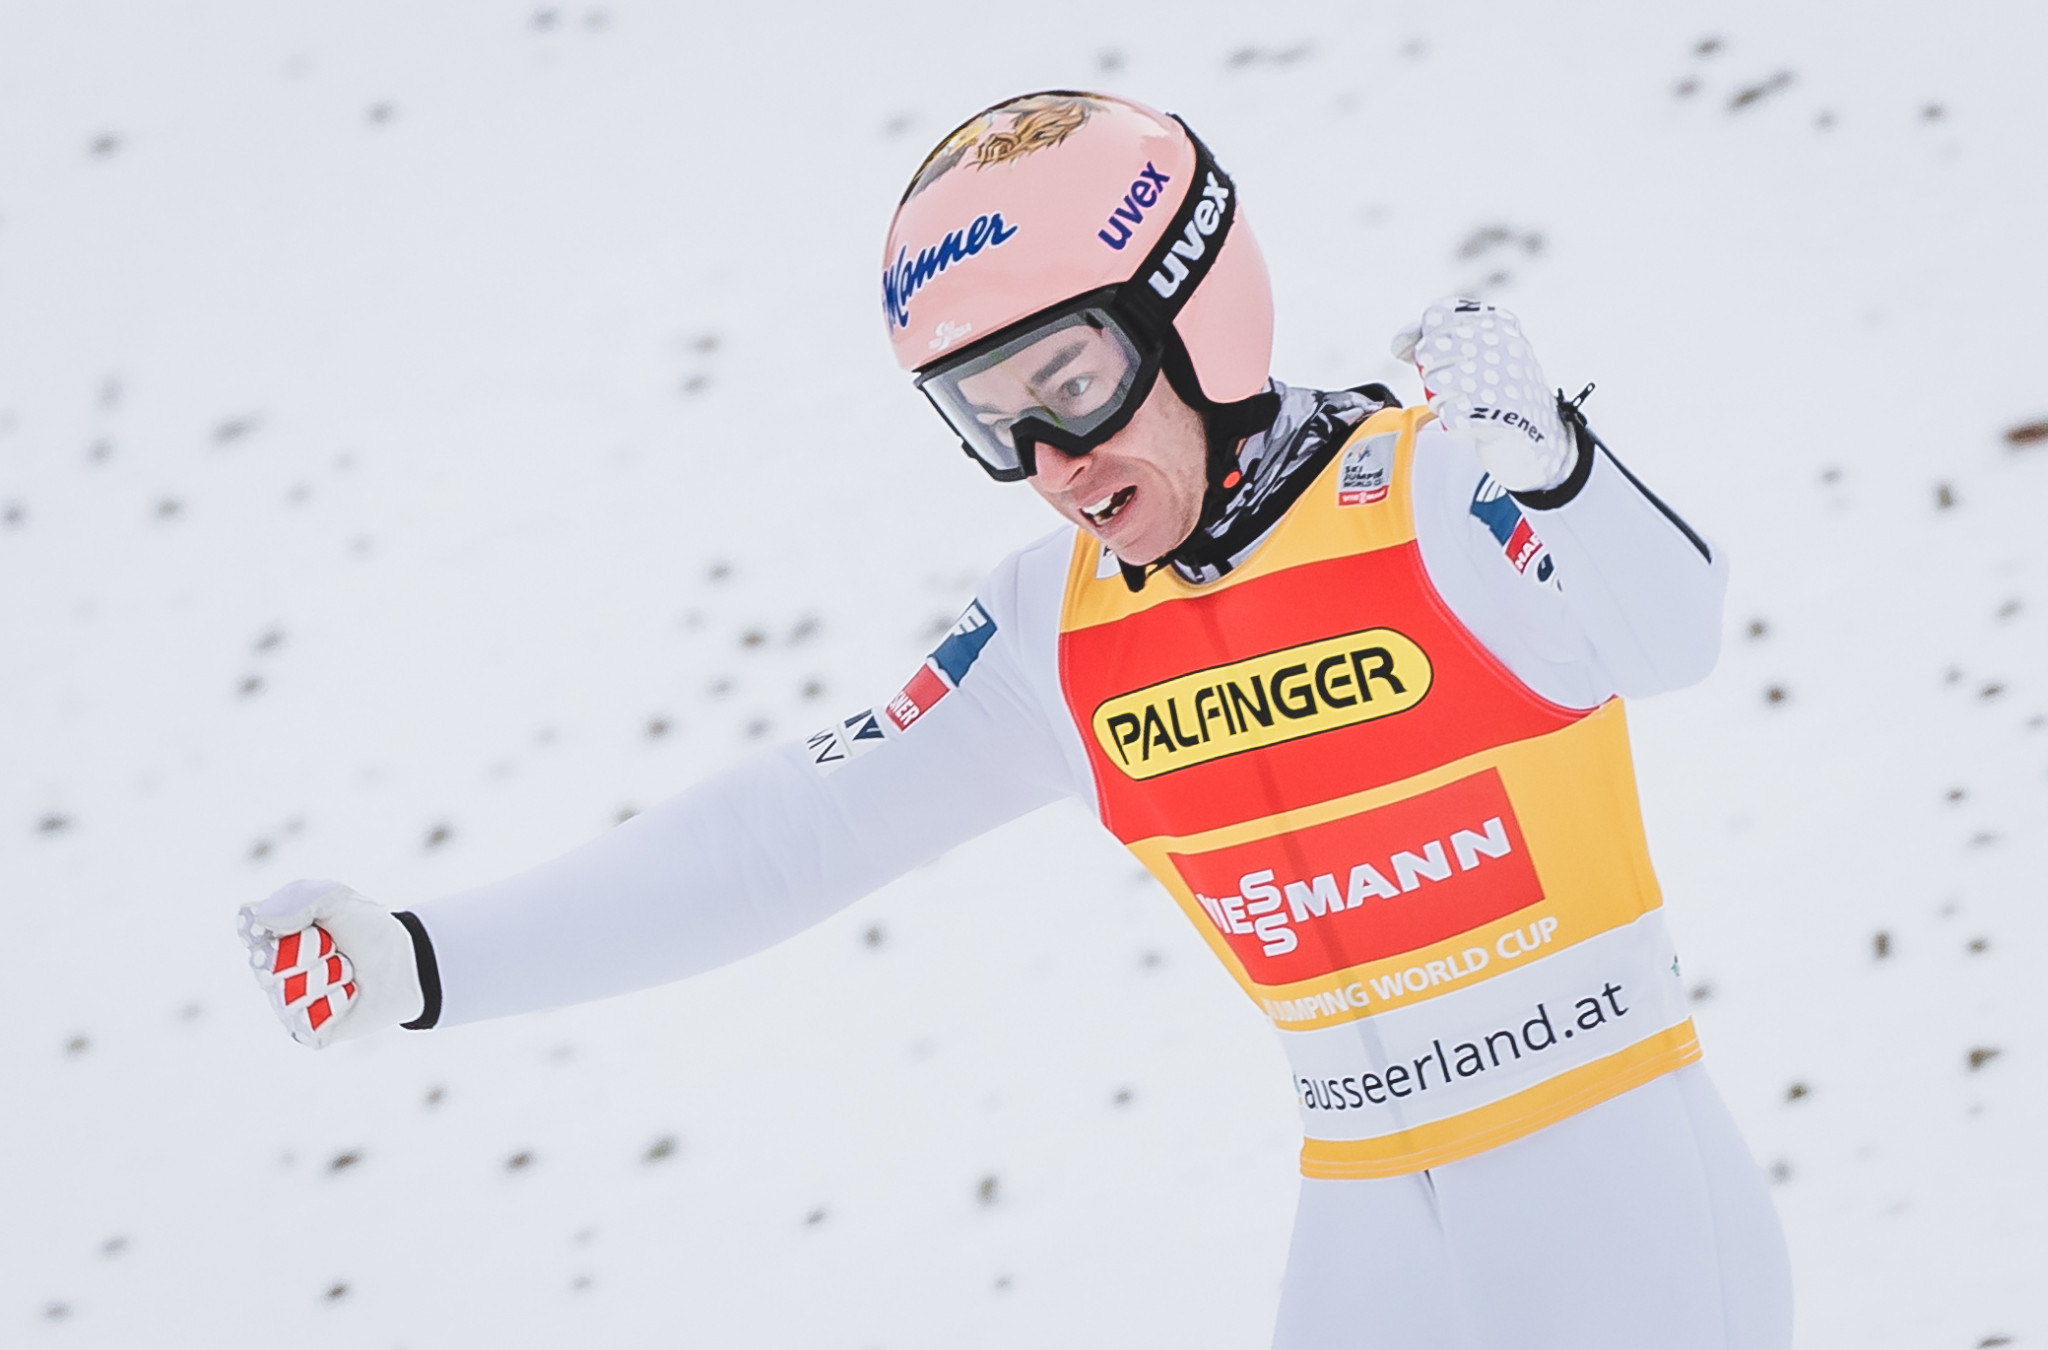 FIS Ski Jumping World Cup leader Stefan Kraft returned to form in his home nation of Austria ©Getty Images